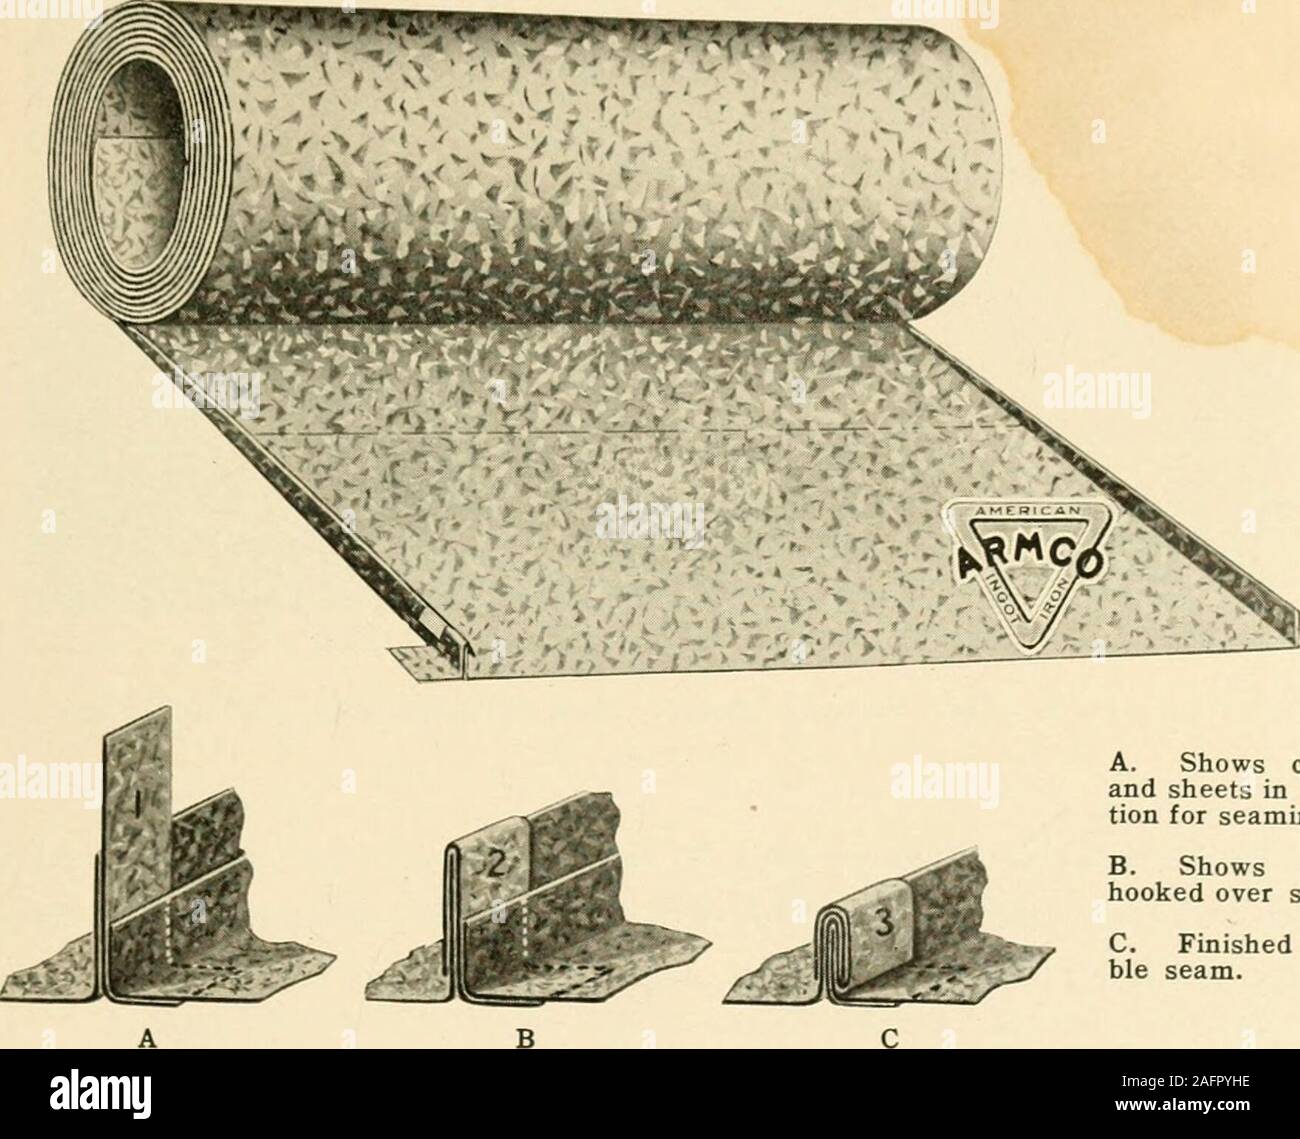 Armco" iron rust-resisting products.. 4-X GRADE DOUBLE CROSS-LOCK ROLL  ROOFING MADE OF EITHER PAINTED OR GALVANIZED IRON Fig. 27.. A. Shows  cleatsand sheets in posi-tion for seaming. B. Shows cleathooked over